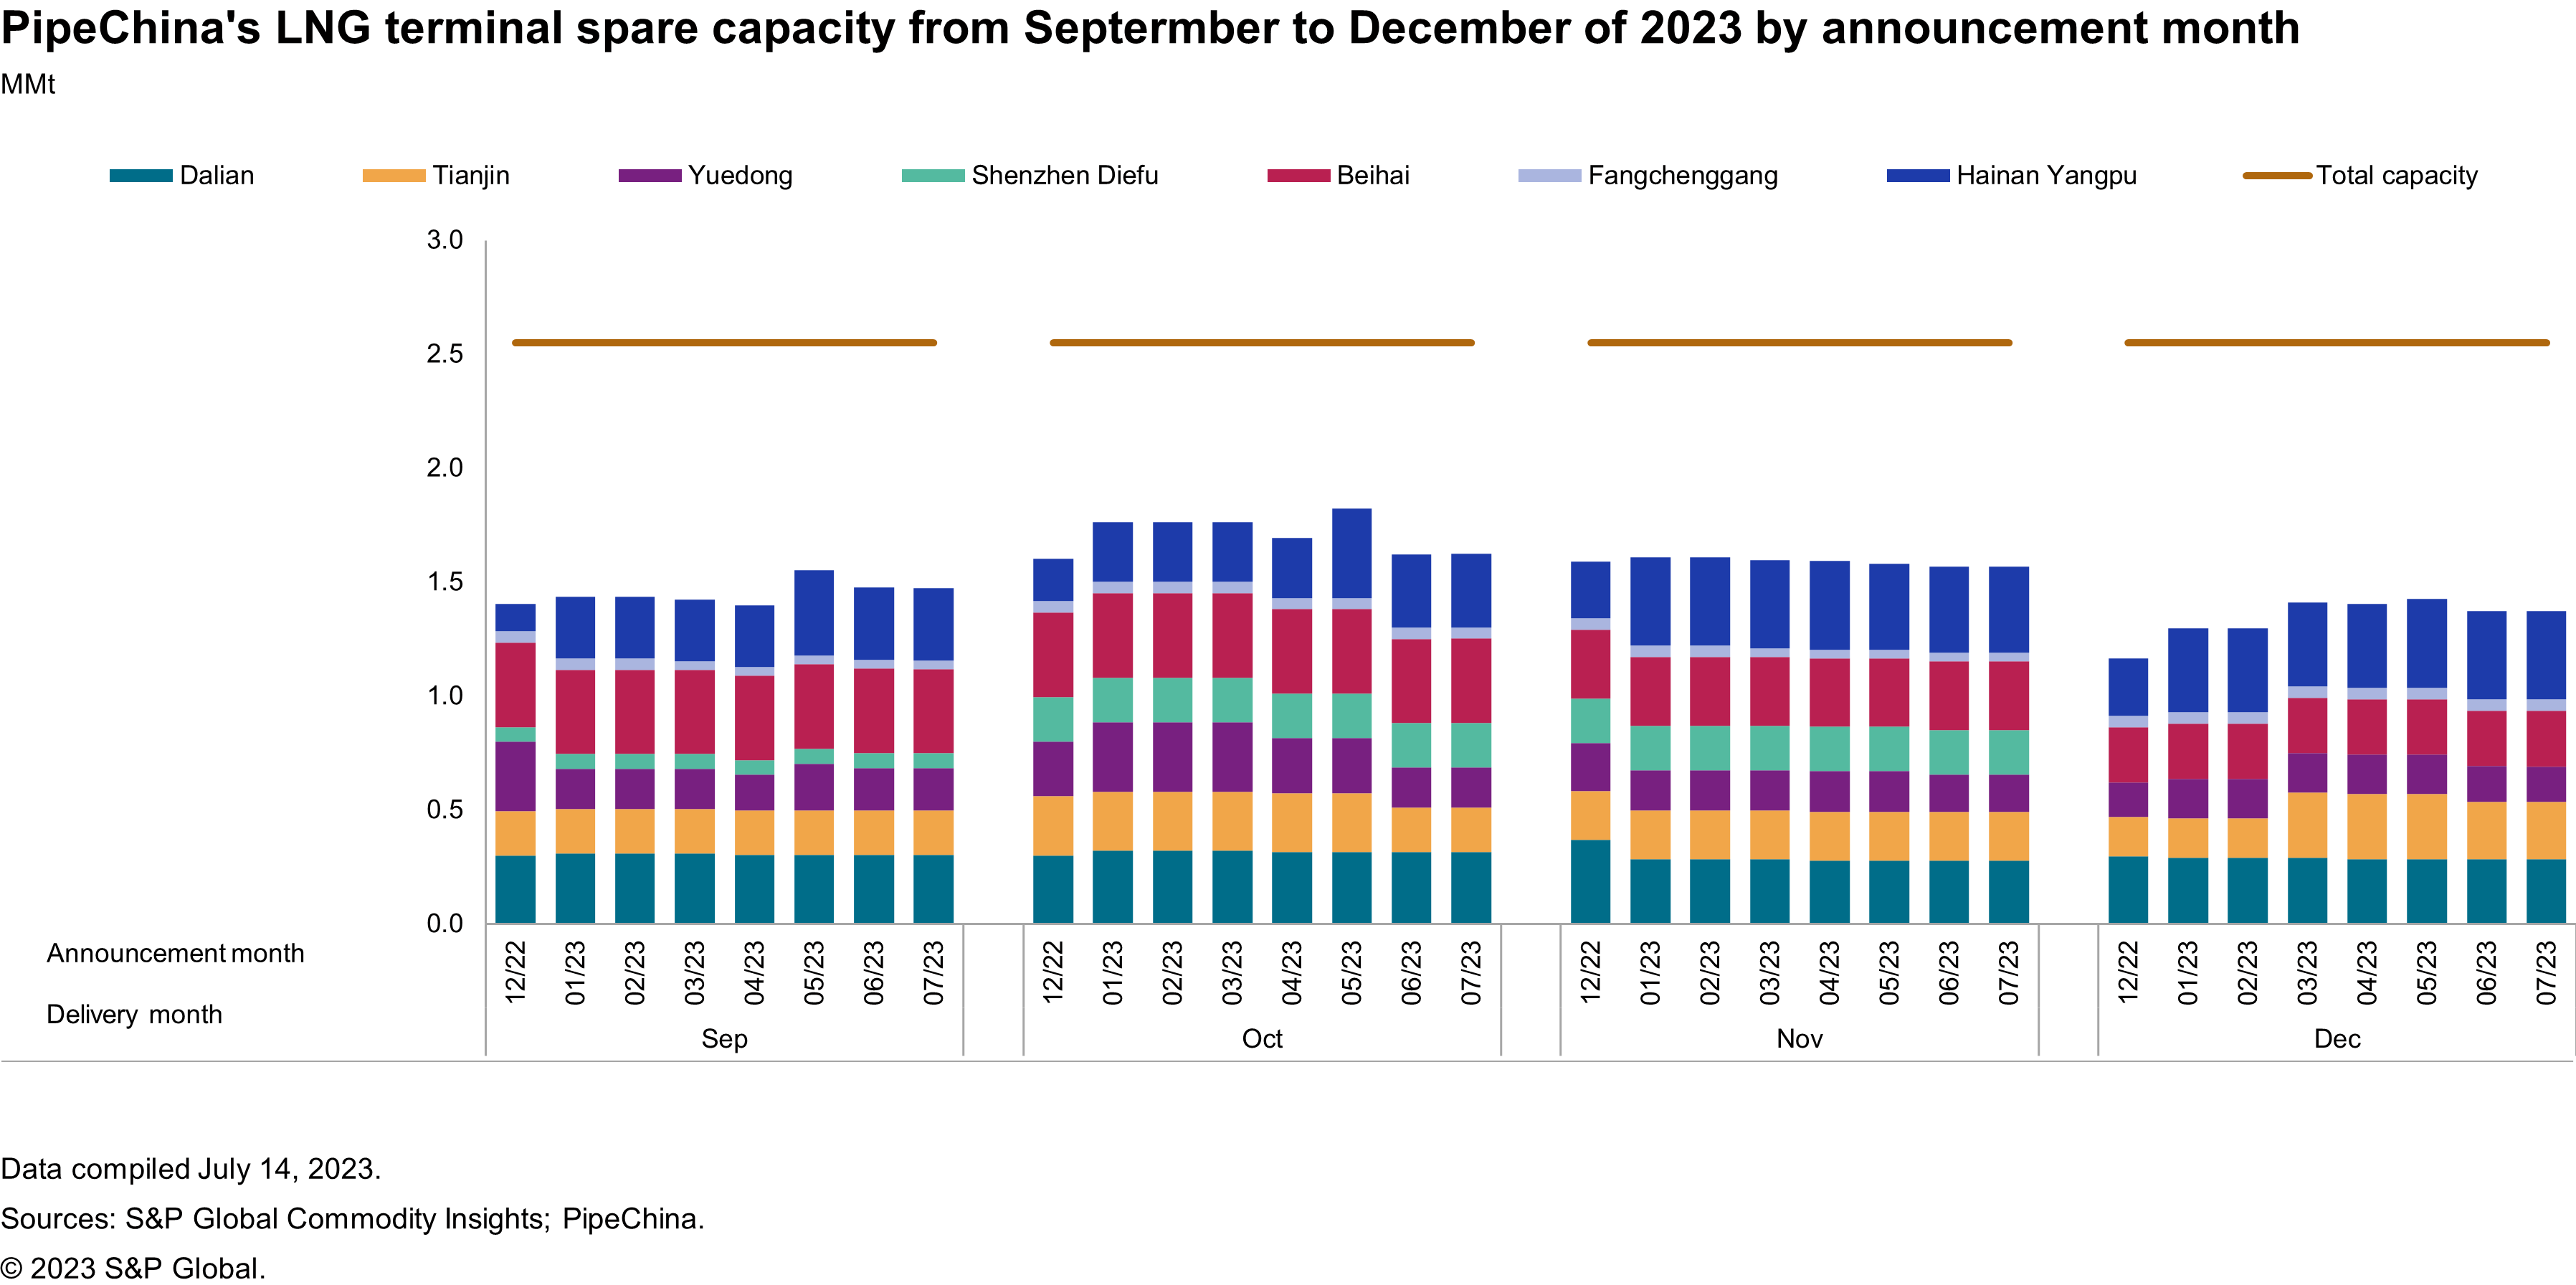 PipeChina's LNG terminal spare capacity from September to December of 2023 by announcement month